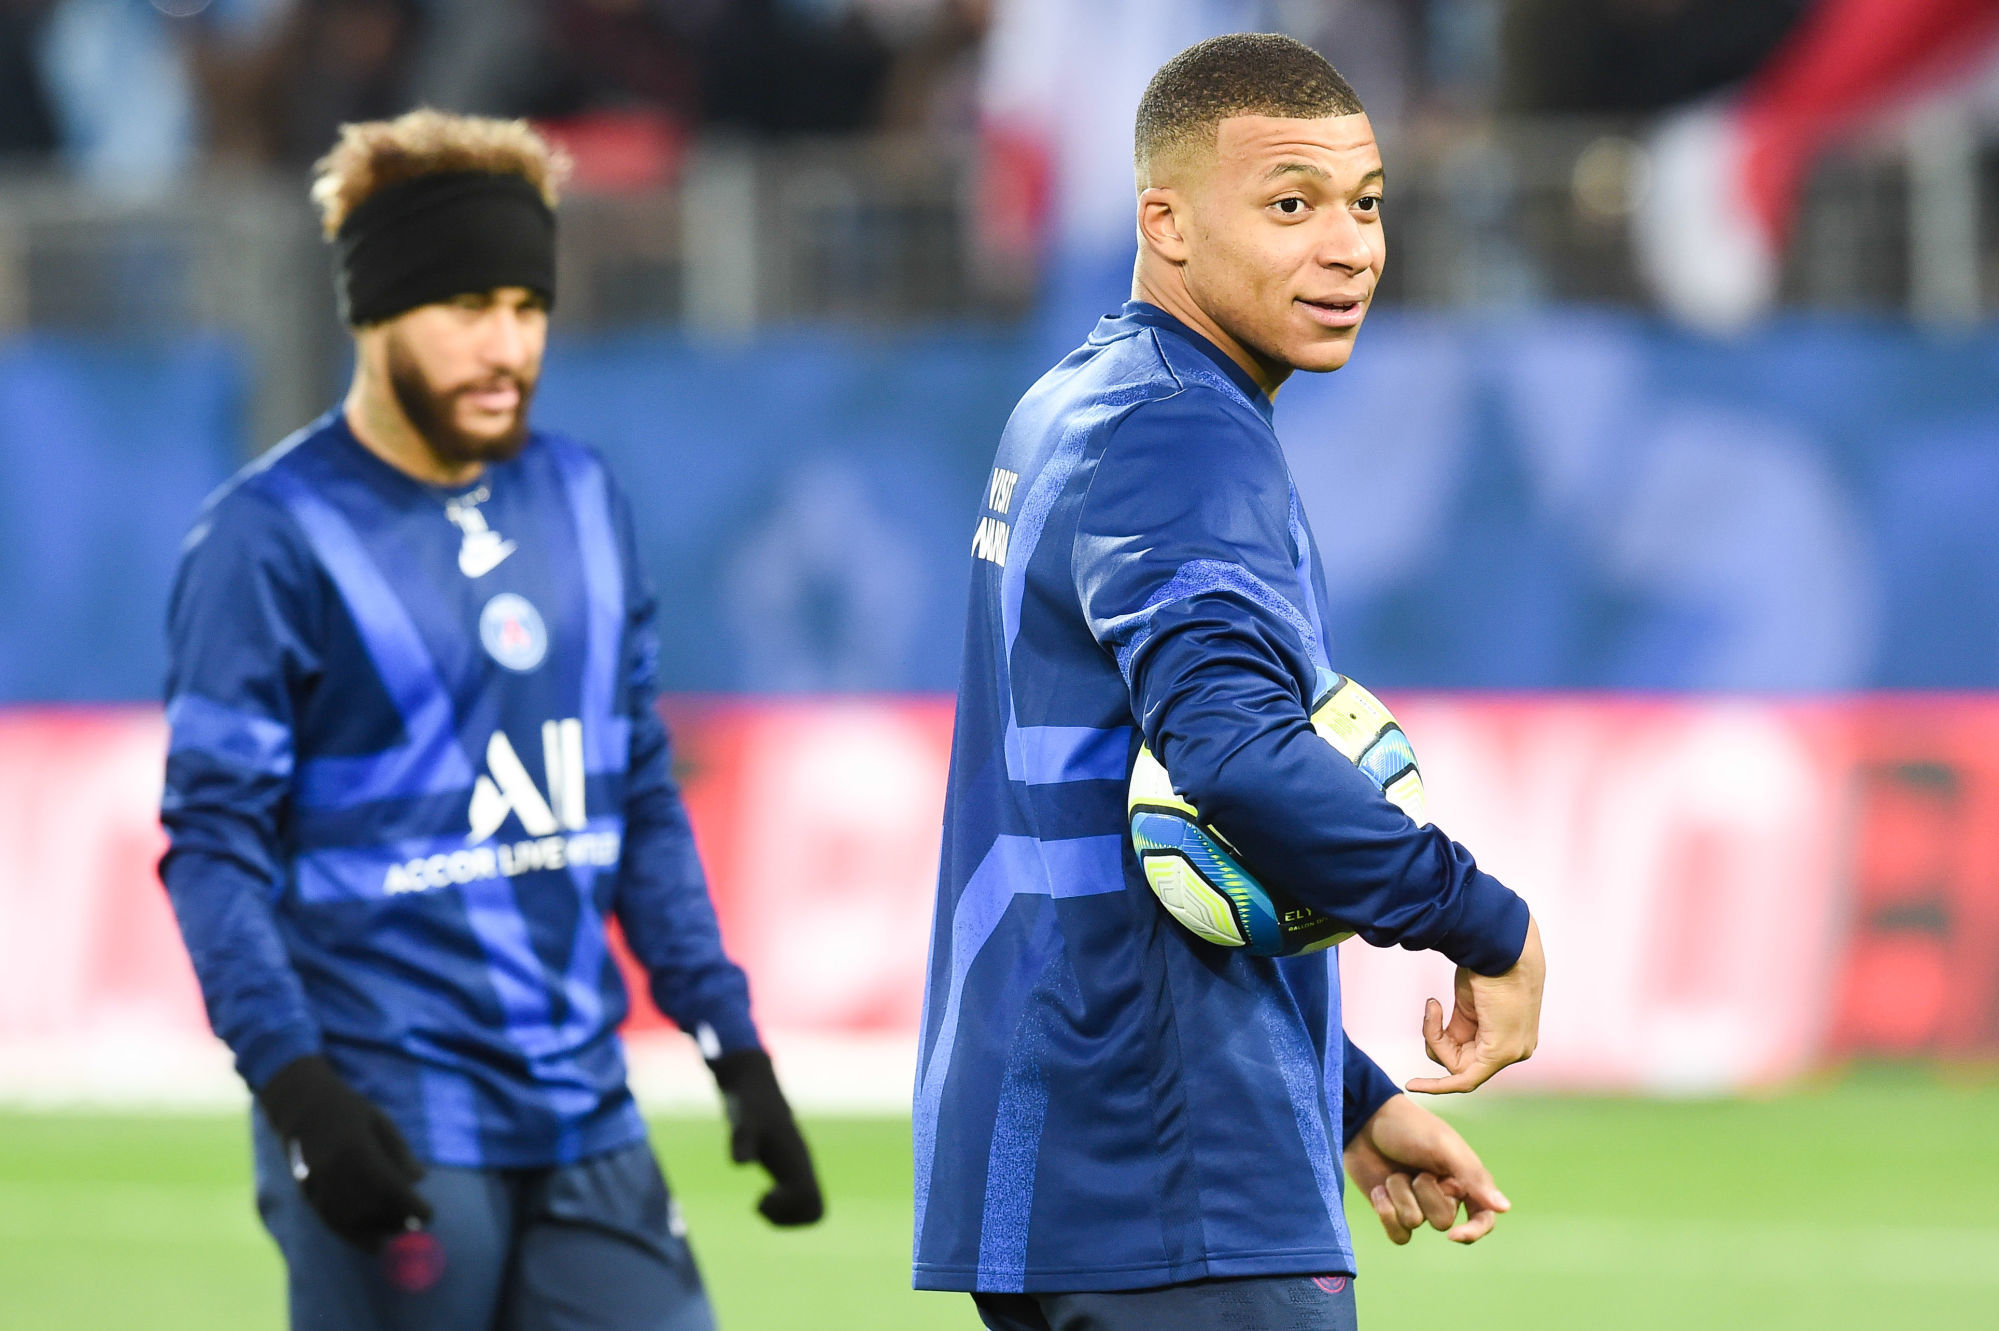 KYlian MBAPPE of Paris Saint-Germain and NEYMAR Jr of Paris Saint-Germain  during the Ligue 1 match between Montpellier HSC and Paris Saint-Germain at Stade de la Mosson on December 7, 2019 in Montpellier, France. (Photo by Alexandre Dimou/Icon Sport) - NEYMAR JR - Kylian MBAPPE - Stade de la Mosson - Montpellier (France)